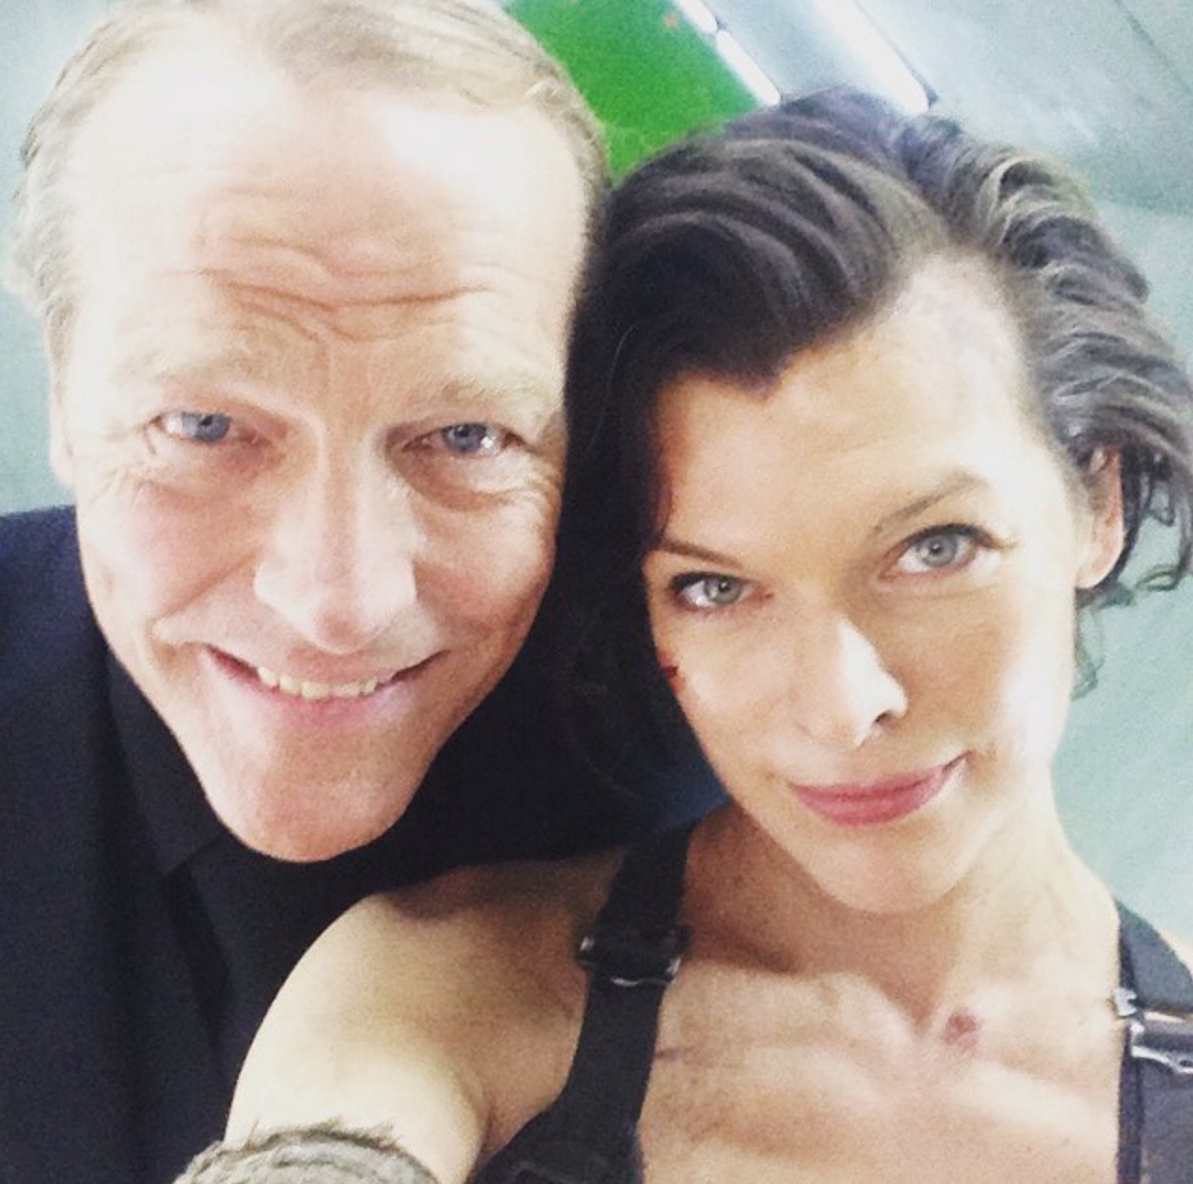 Milla Jovovich Shares Another Resident Evil: The Final Chapter  Behind-The-Scenes Photo